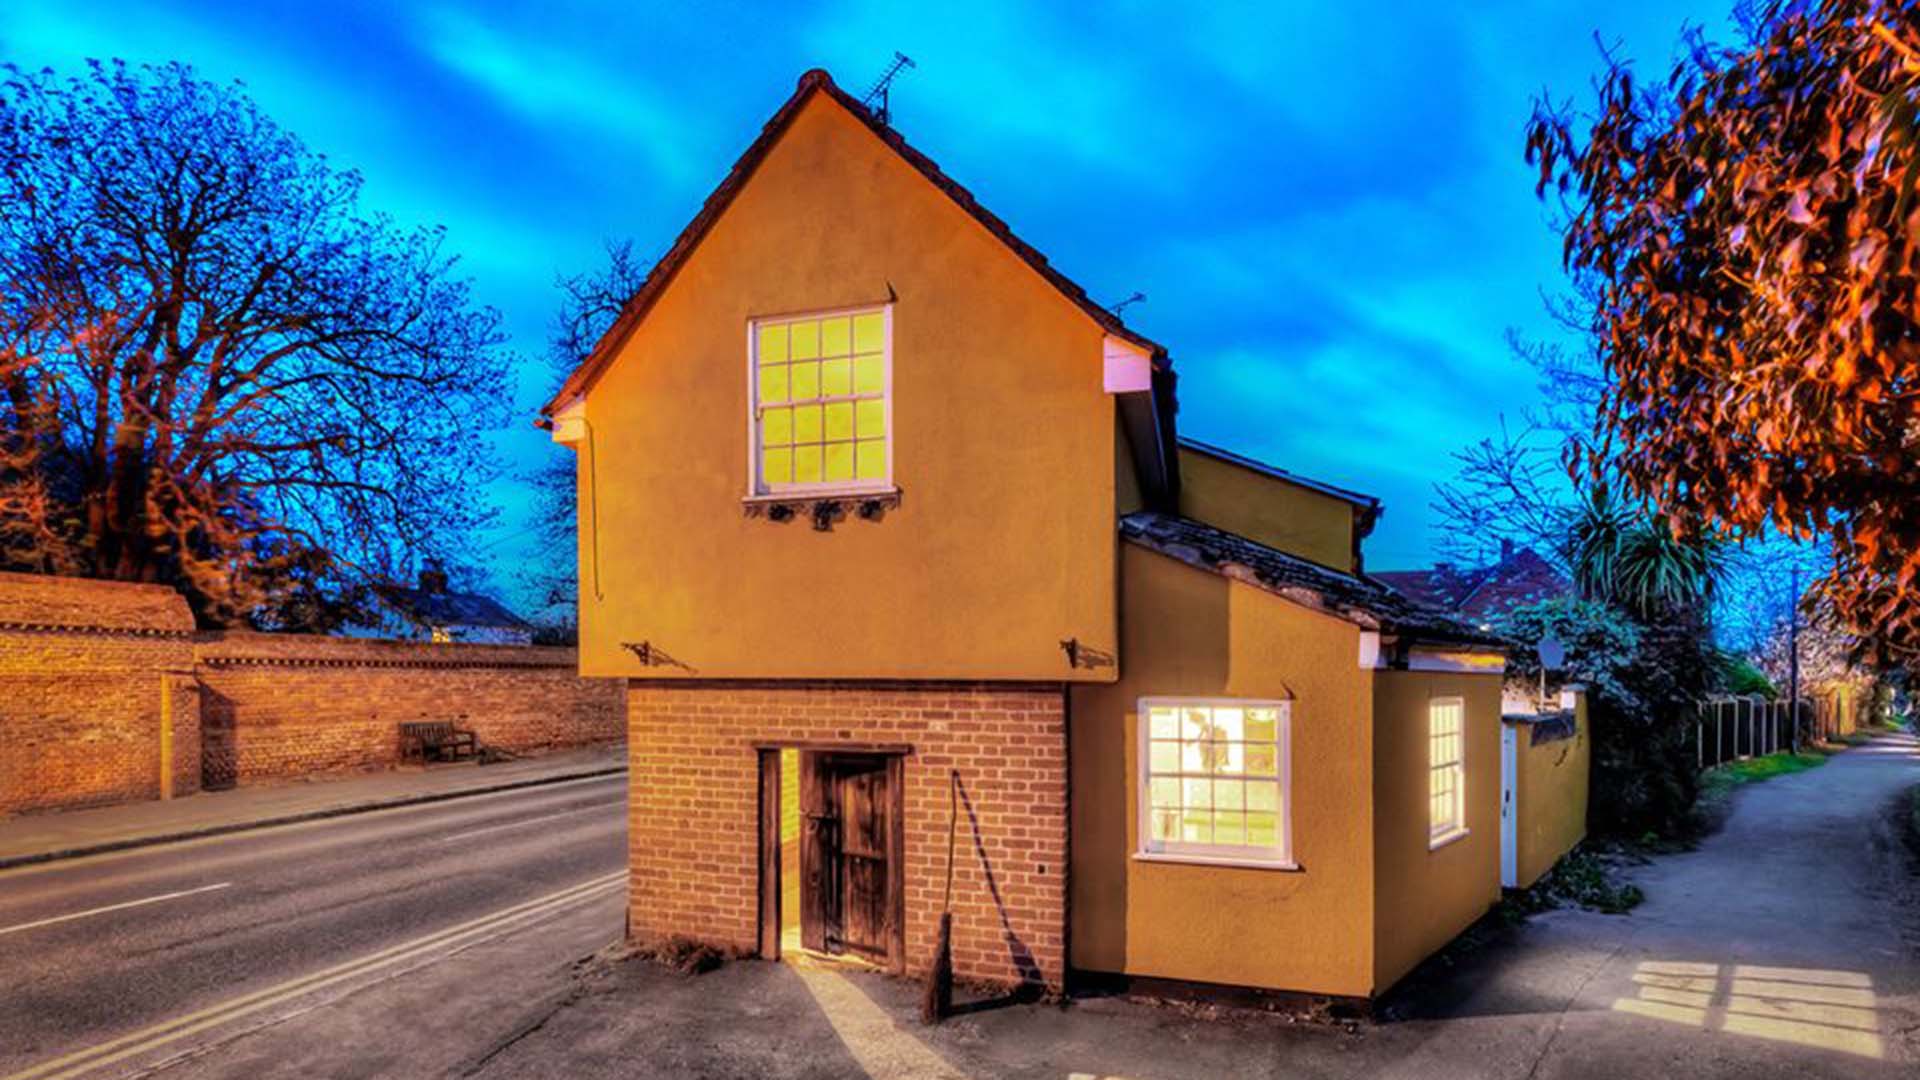 You Can Now Buy Britain's Notorious (and Supposedly Haunted) Medieval Witch Prison